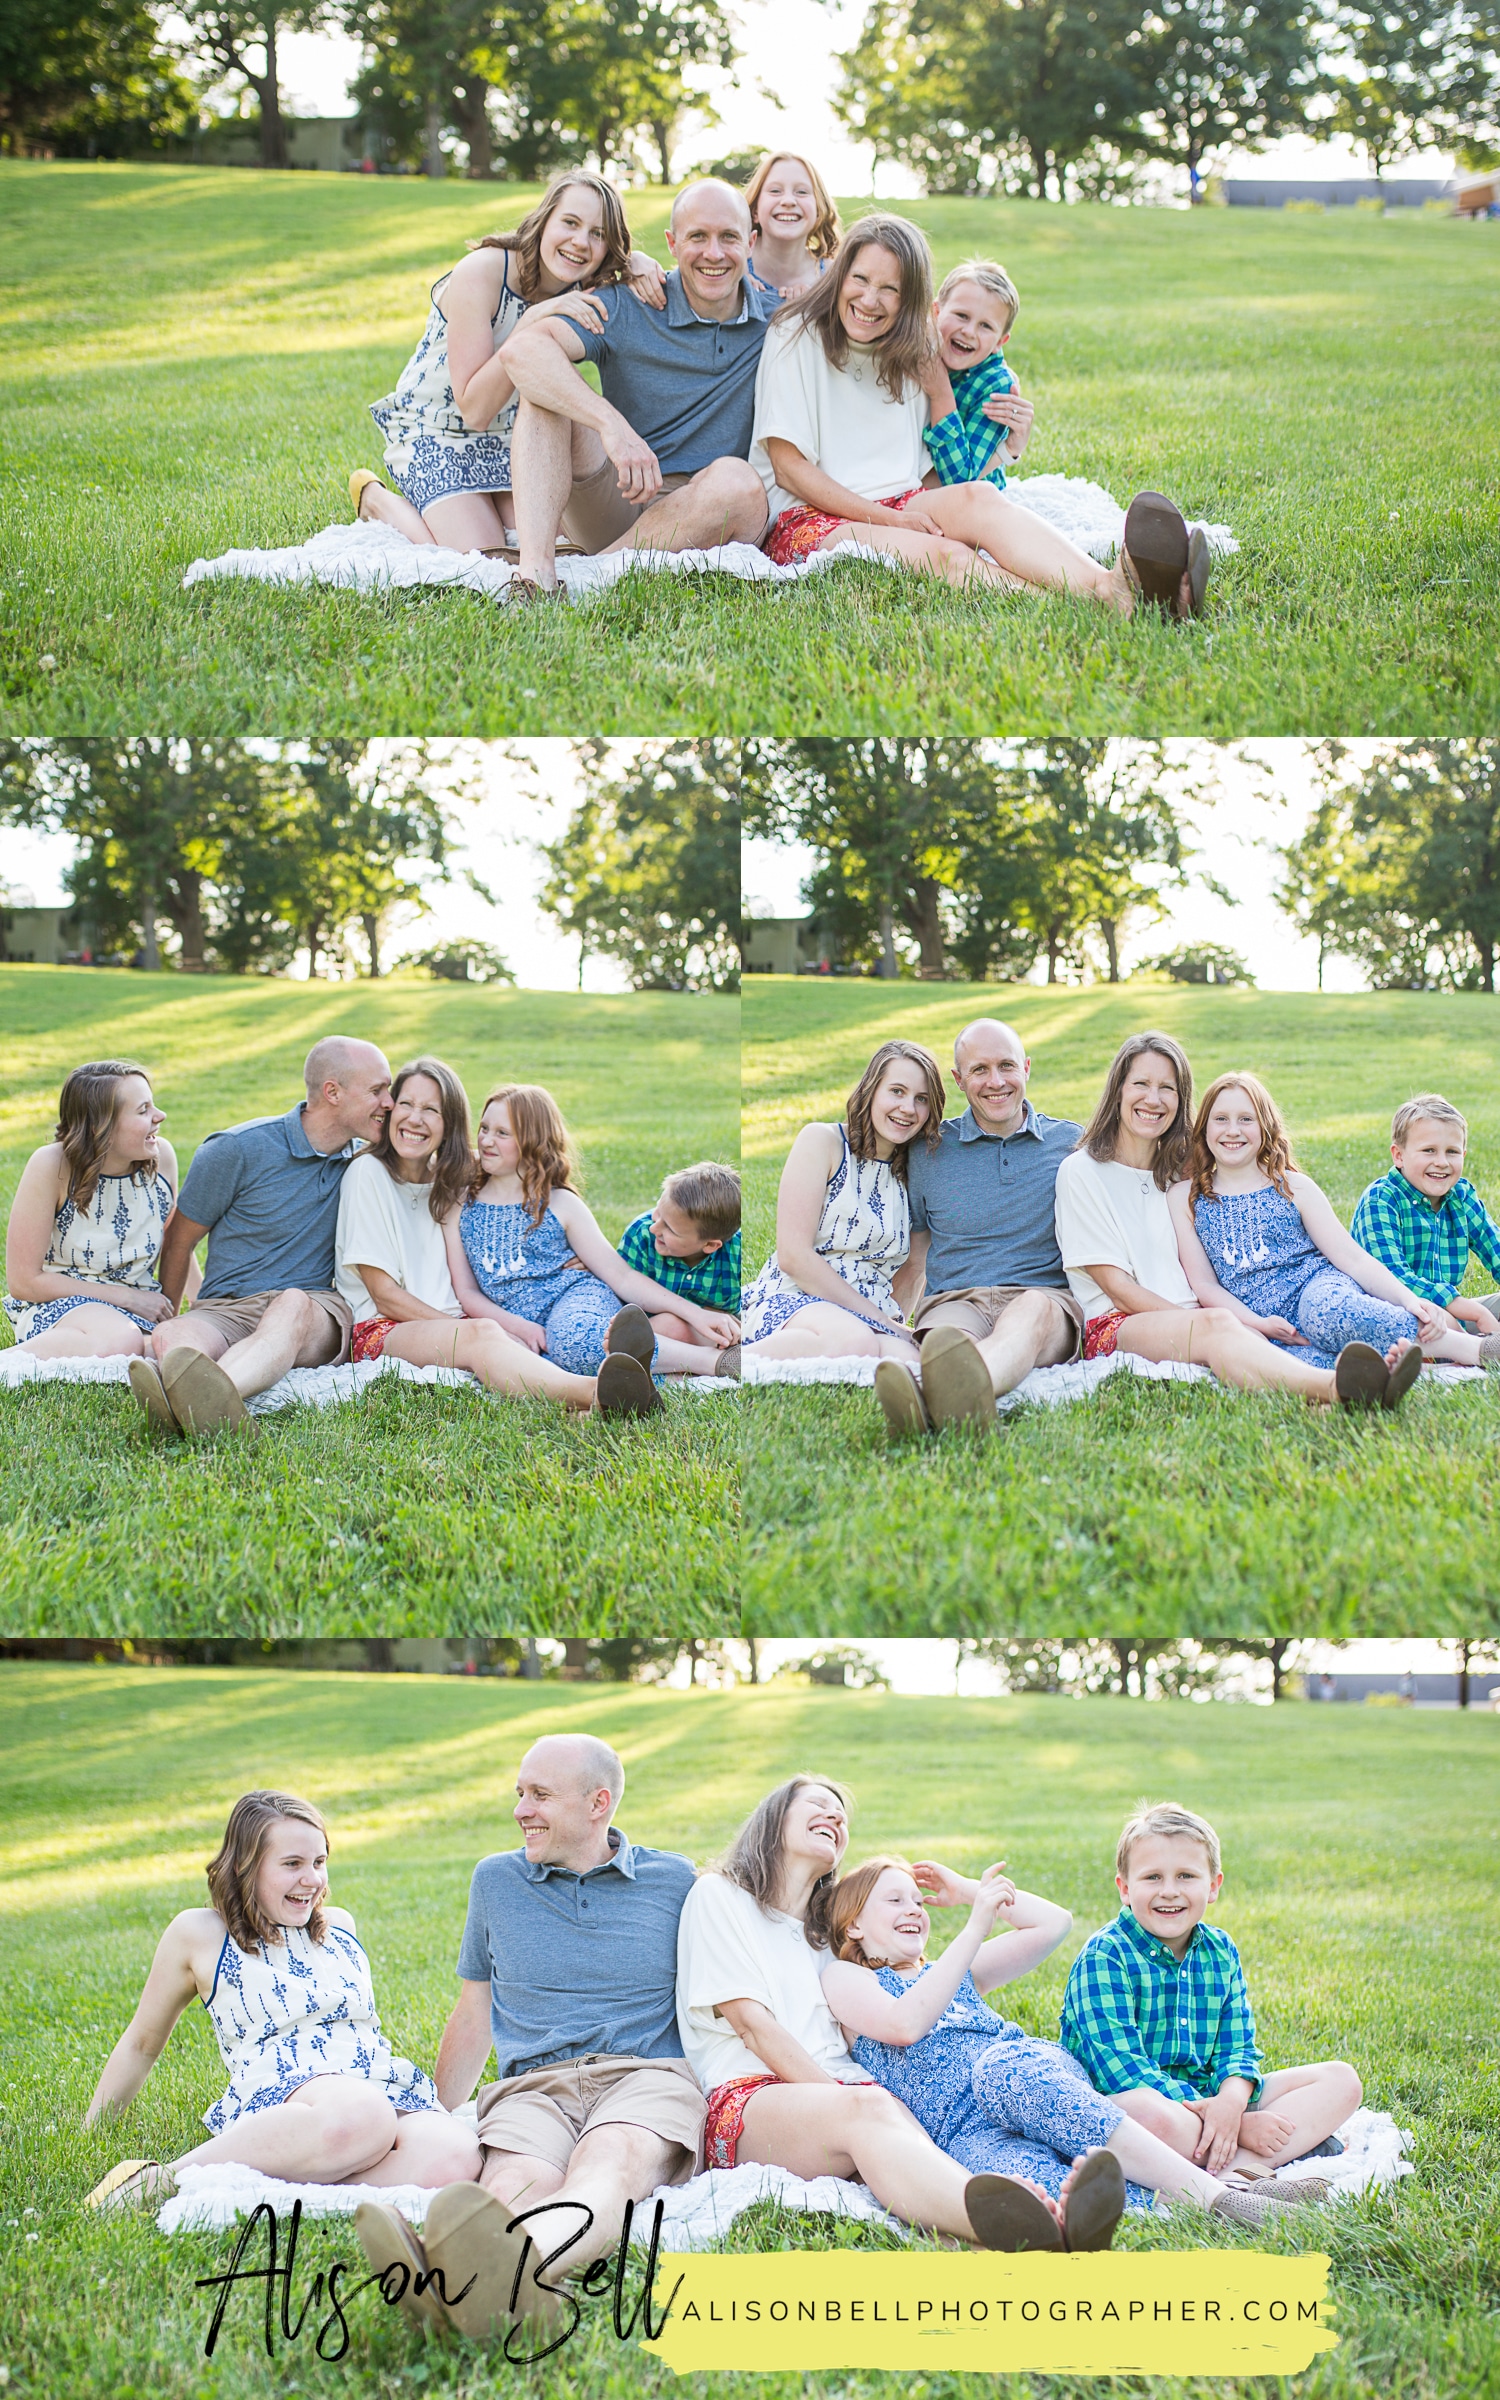 Family of 5 with older kids photo session at Wolf Trap National Park for the Performing Arts in Vienna, Virginia by Alison Bell Photographer, alisonbellphotographer.com